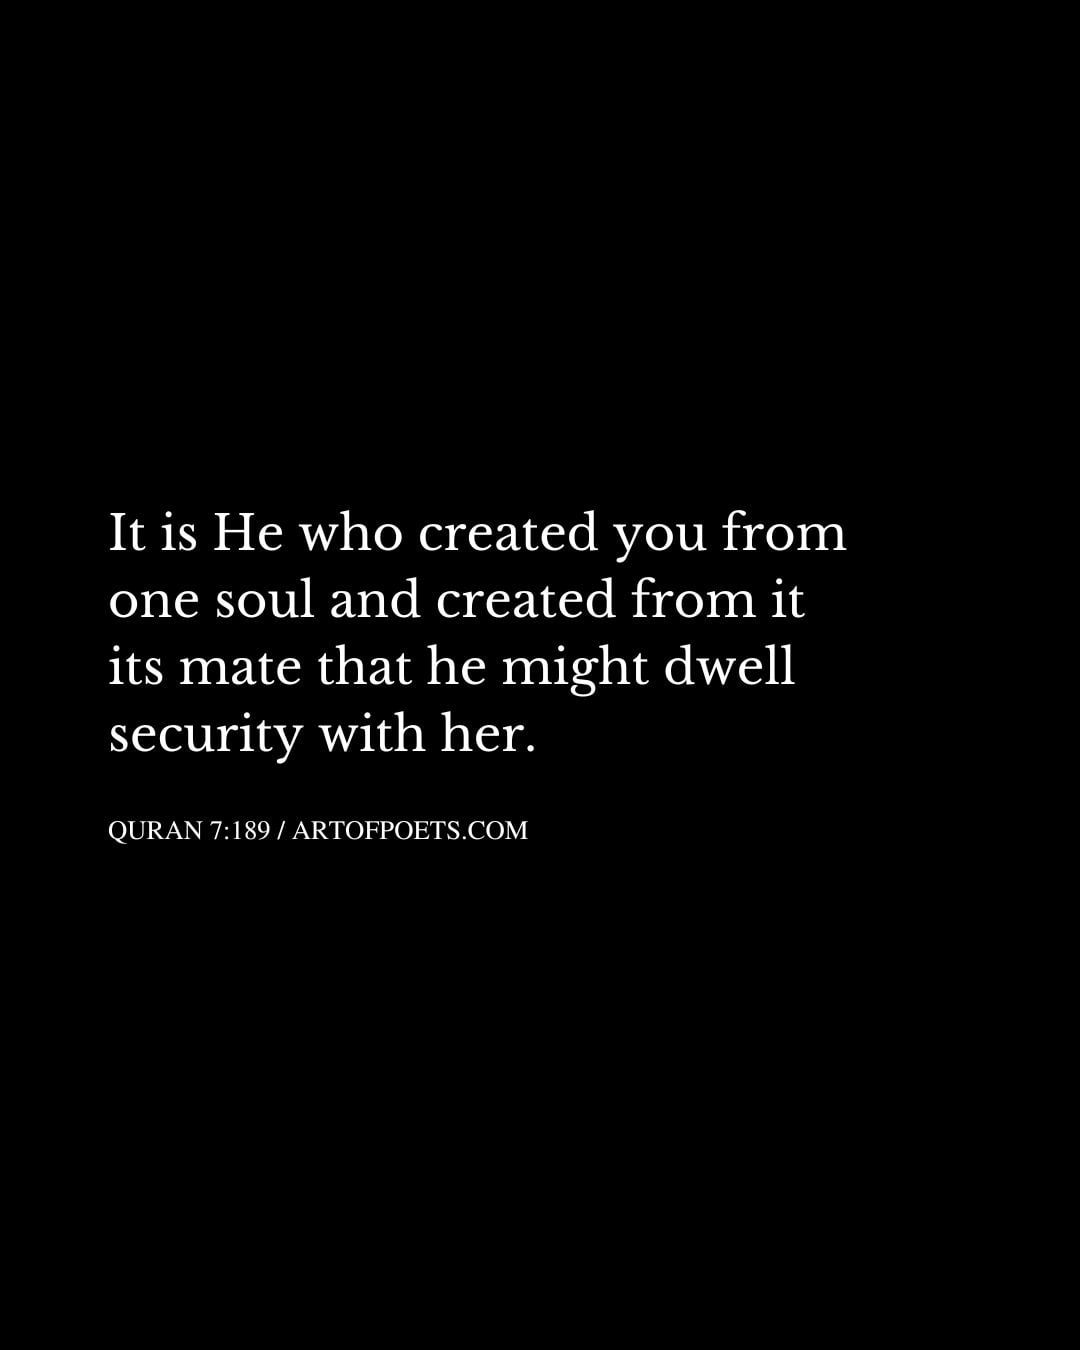 It is He who created you from one soul and created from it its mate that he might dwell security with her